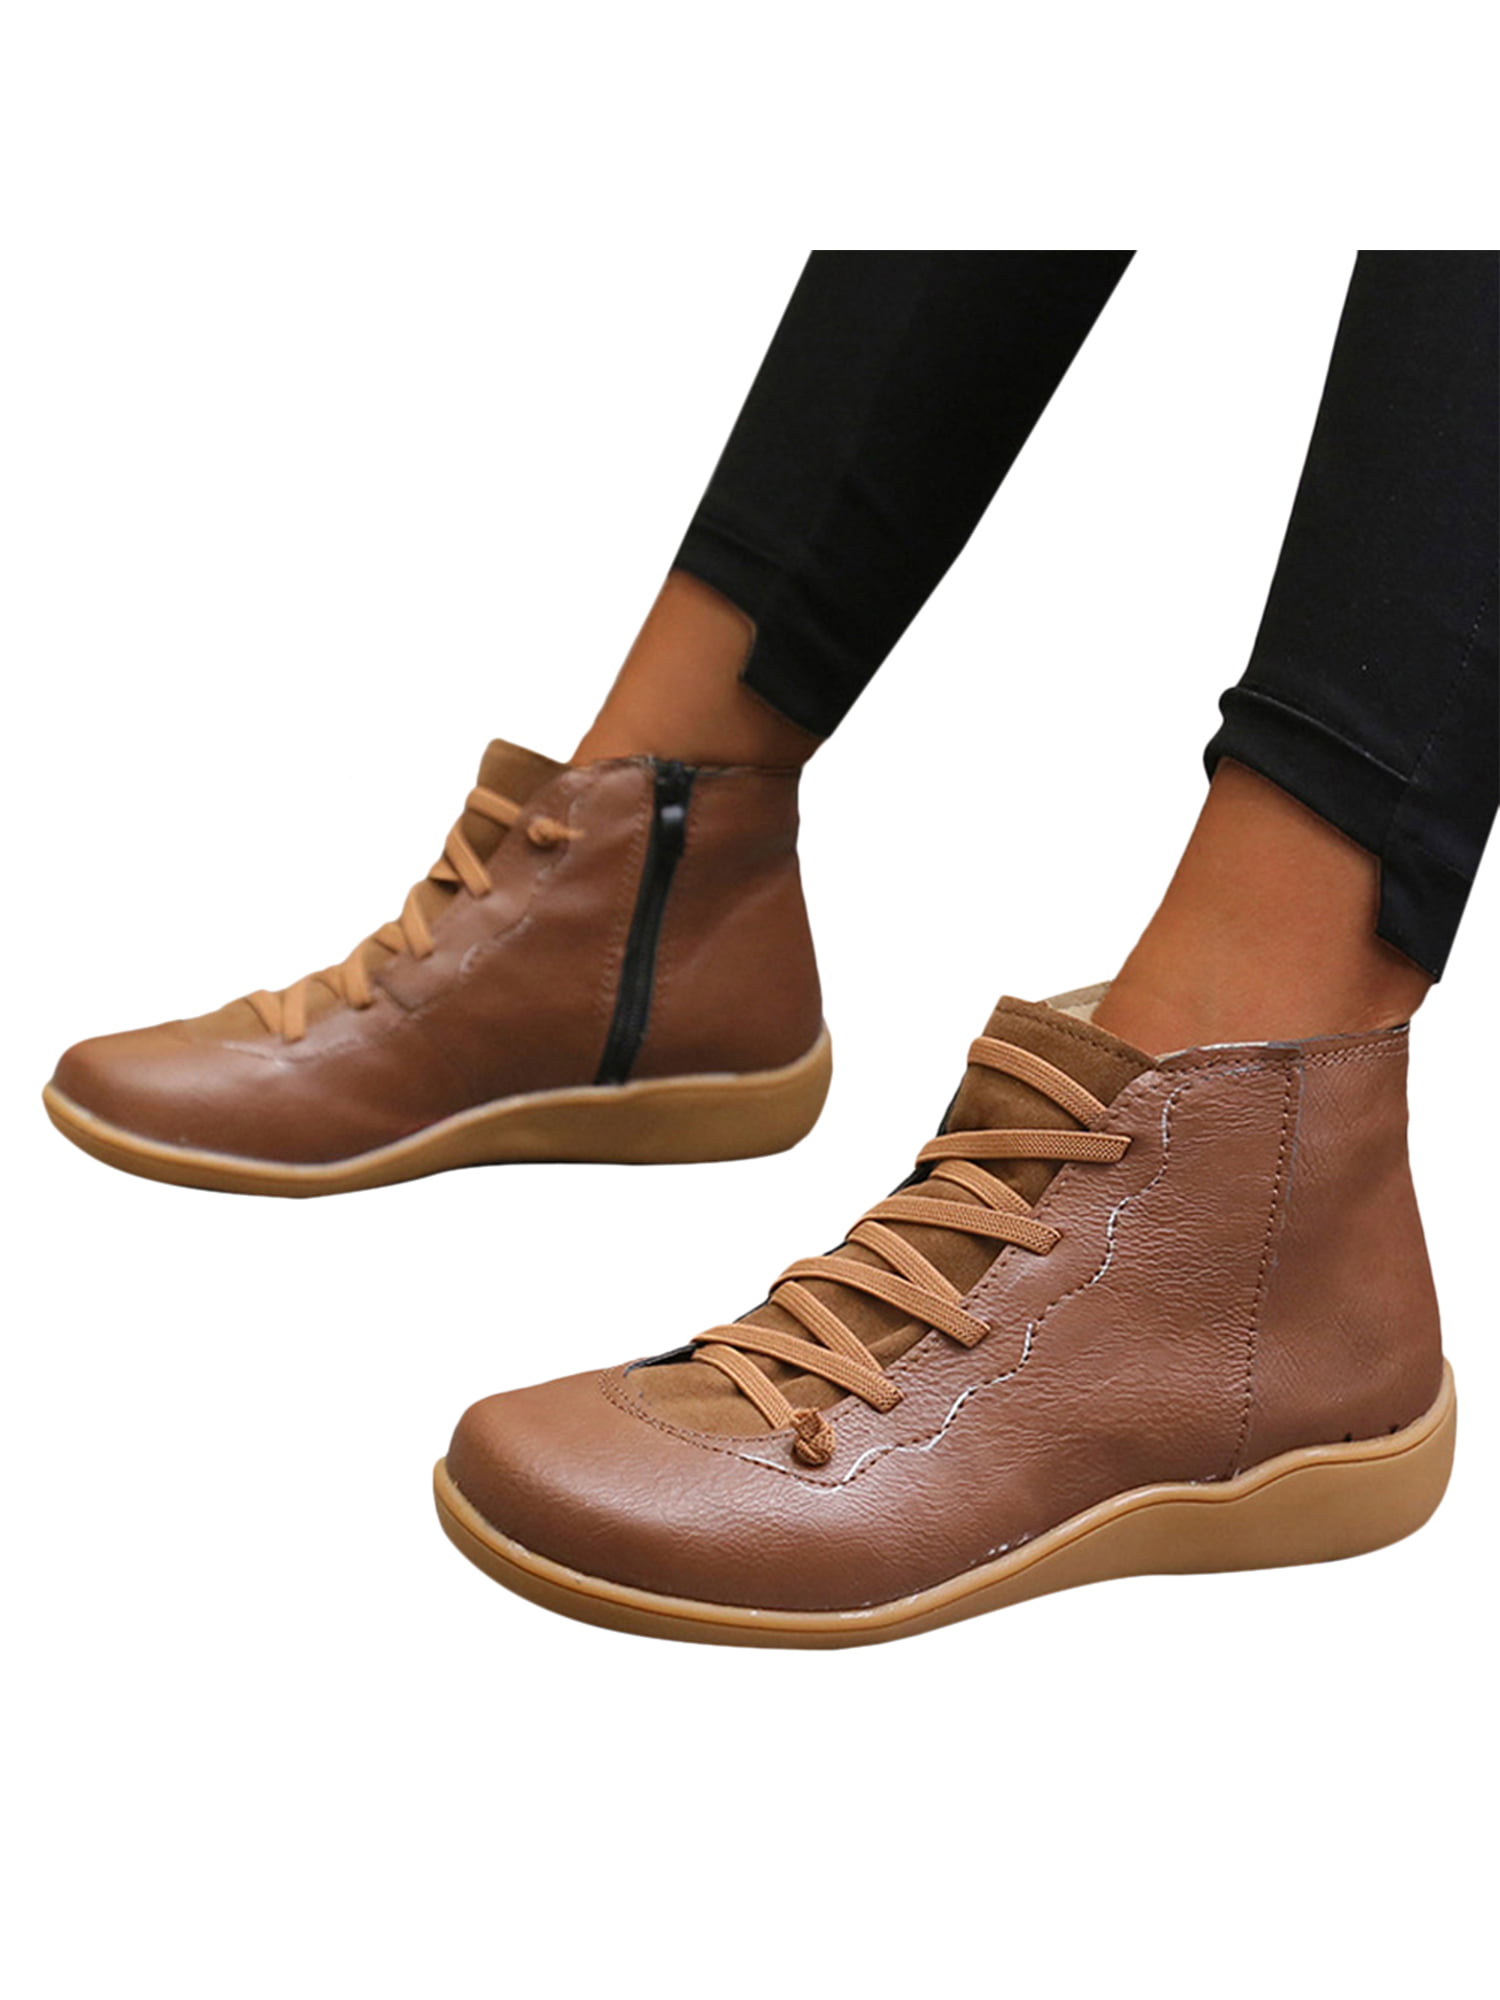 Camper Peu Cami Leather Casual Zip-Up Ankle Womens Boots 